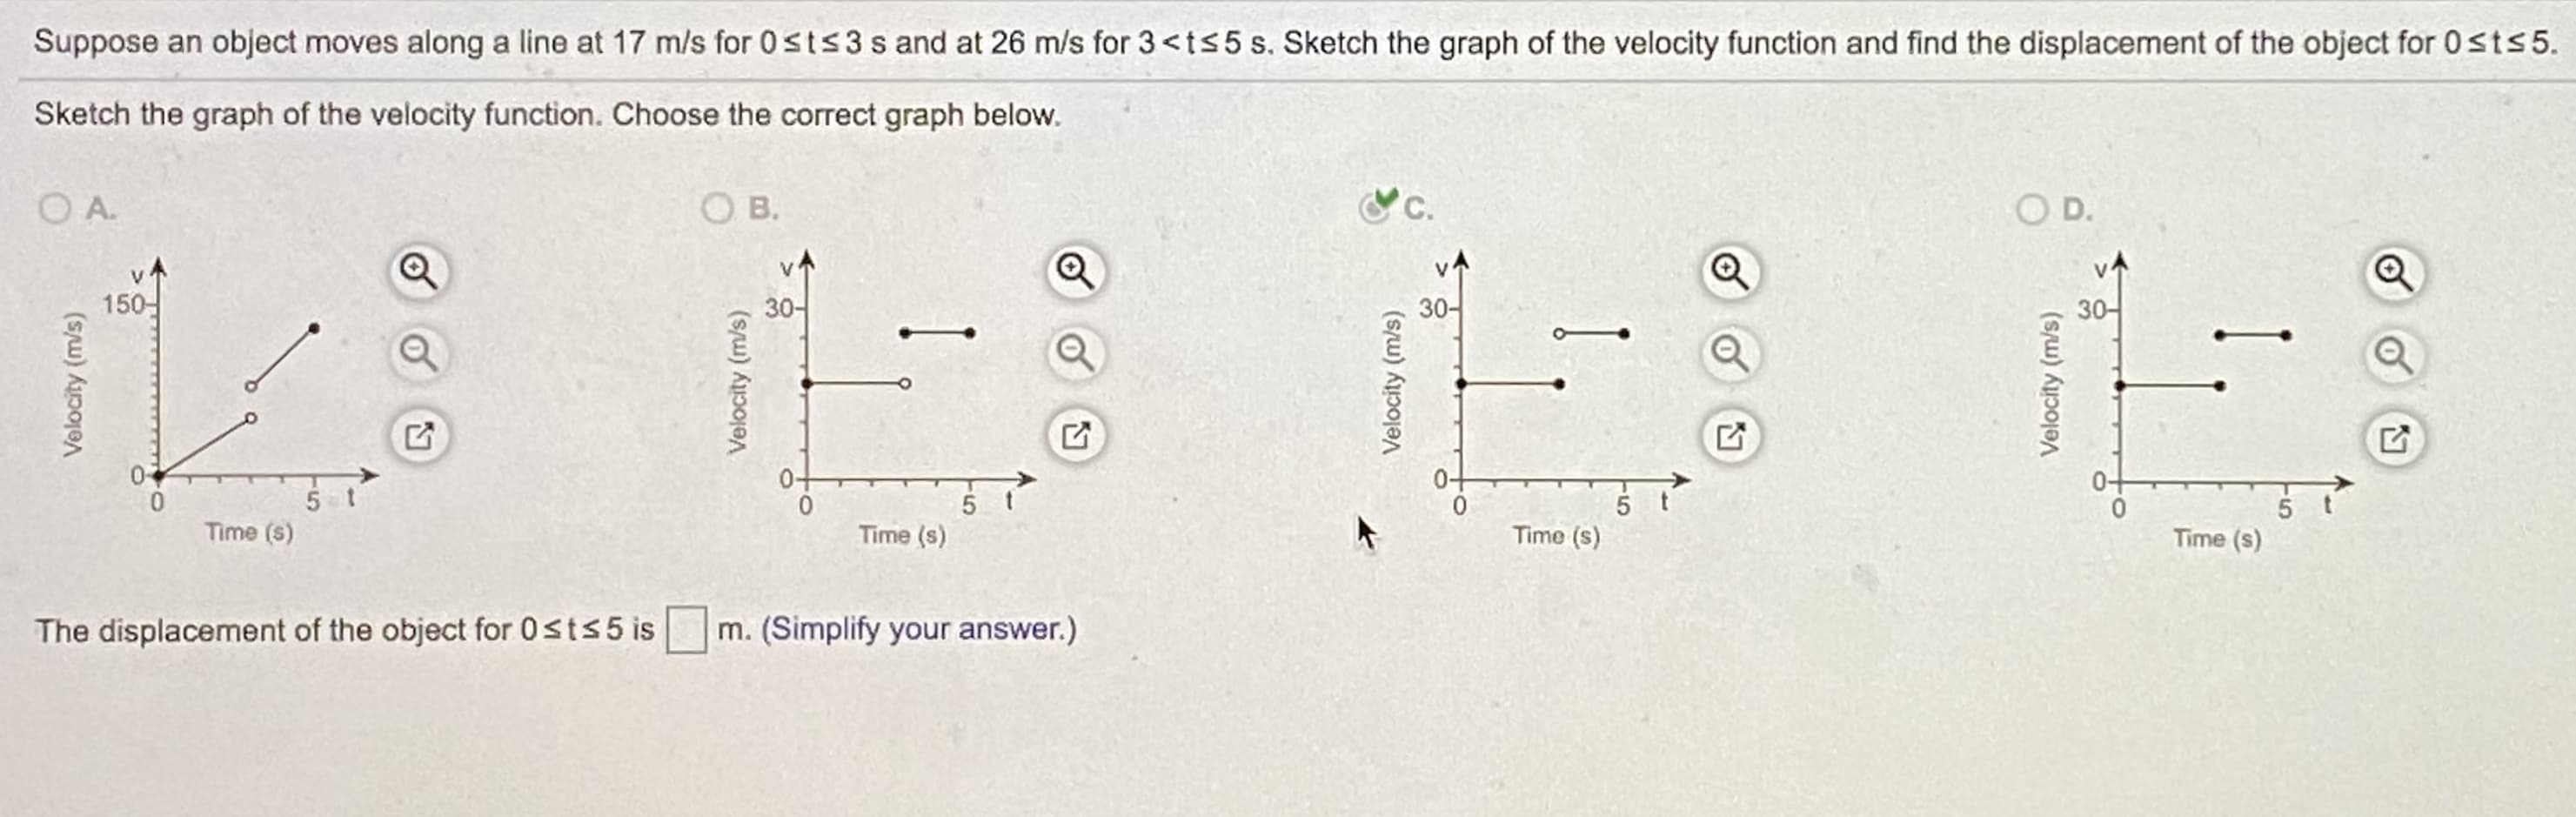 Suppose an object moves along a line at 17 m/s for 0sts3 sand at 26 m/s for 3<ts5 s. Sketch the graph of the velocity function and find the displacement of the object for 0sts5.
Sketch the graph of the velocity function. Choose the correct graph below.
O A.
OB.
O D.
150-
30-
30-
30-
Time (s)
Time (s)
Time (s)
Time (s)
The displacement of the object for 0sts5 is m. (Simplify your answer.)
